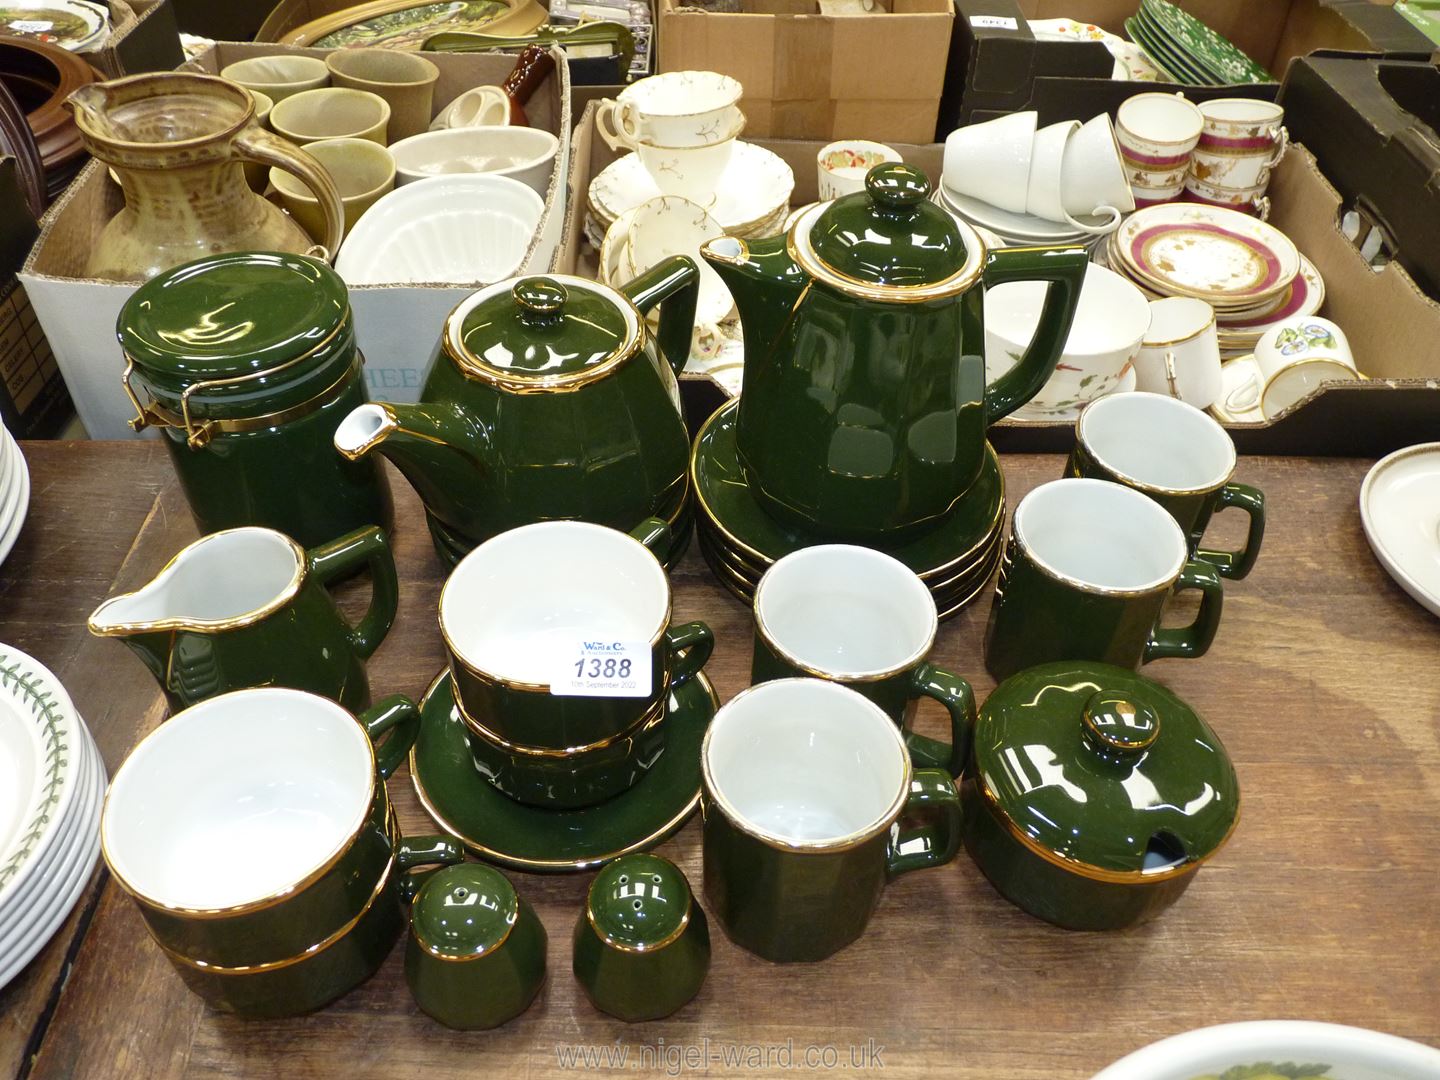 A quantity of Apilco French porcelain green china consisting of four mugs, cups, - Image 2 of 2